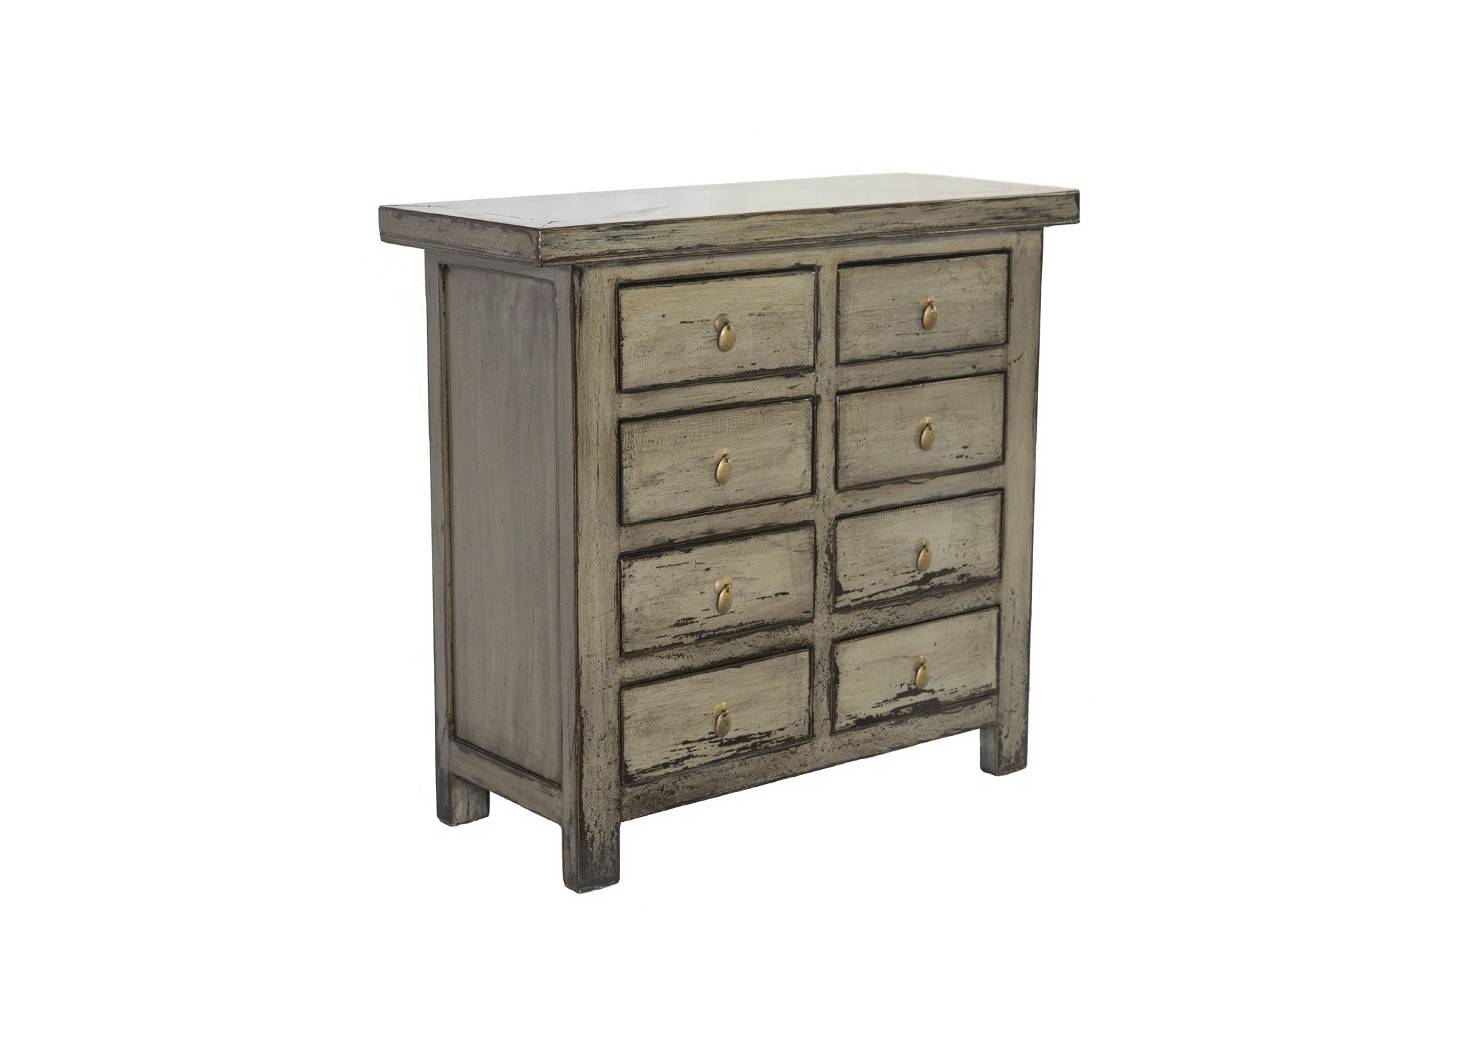 Chinese chest of drawers - 8 drawers - Light green